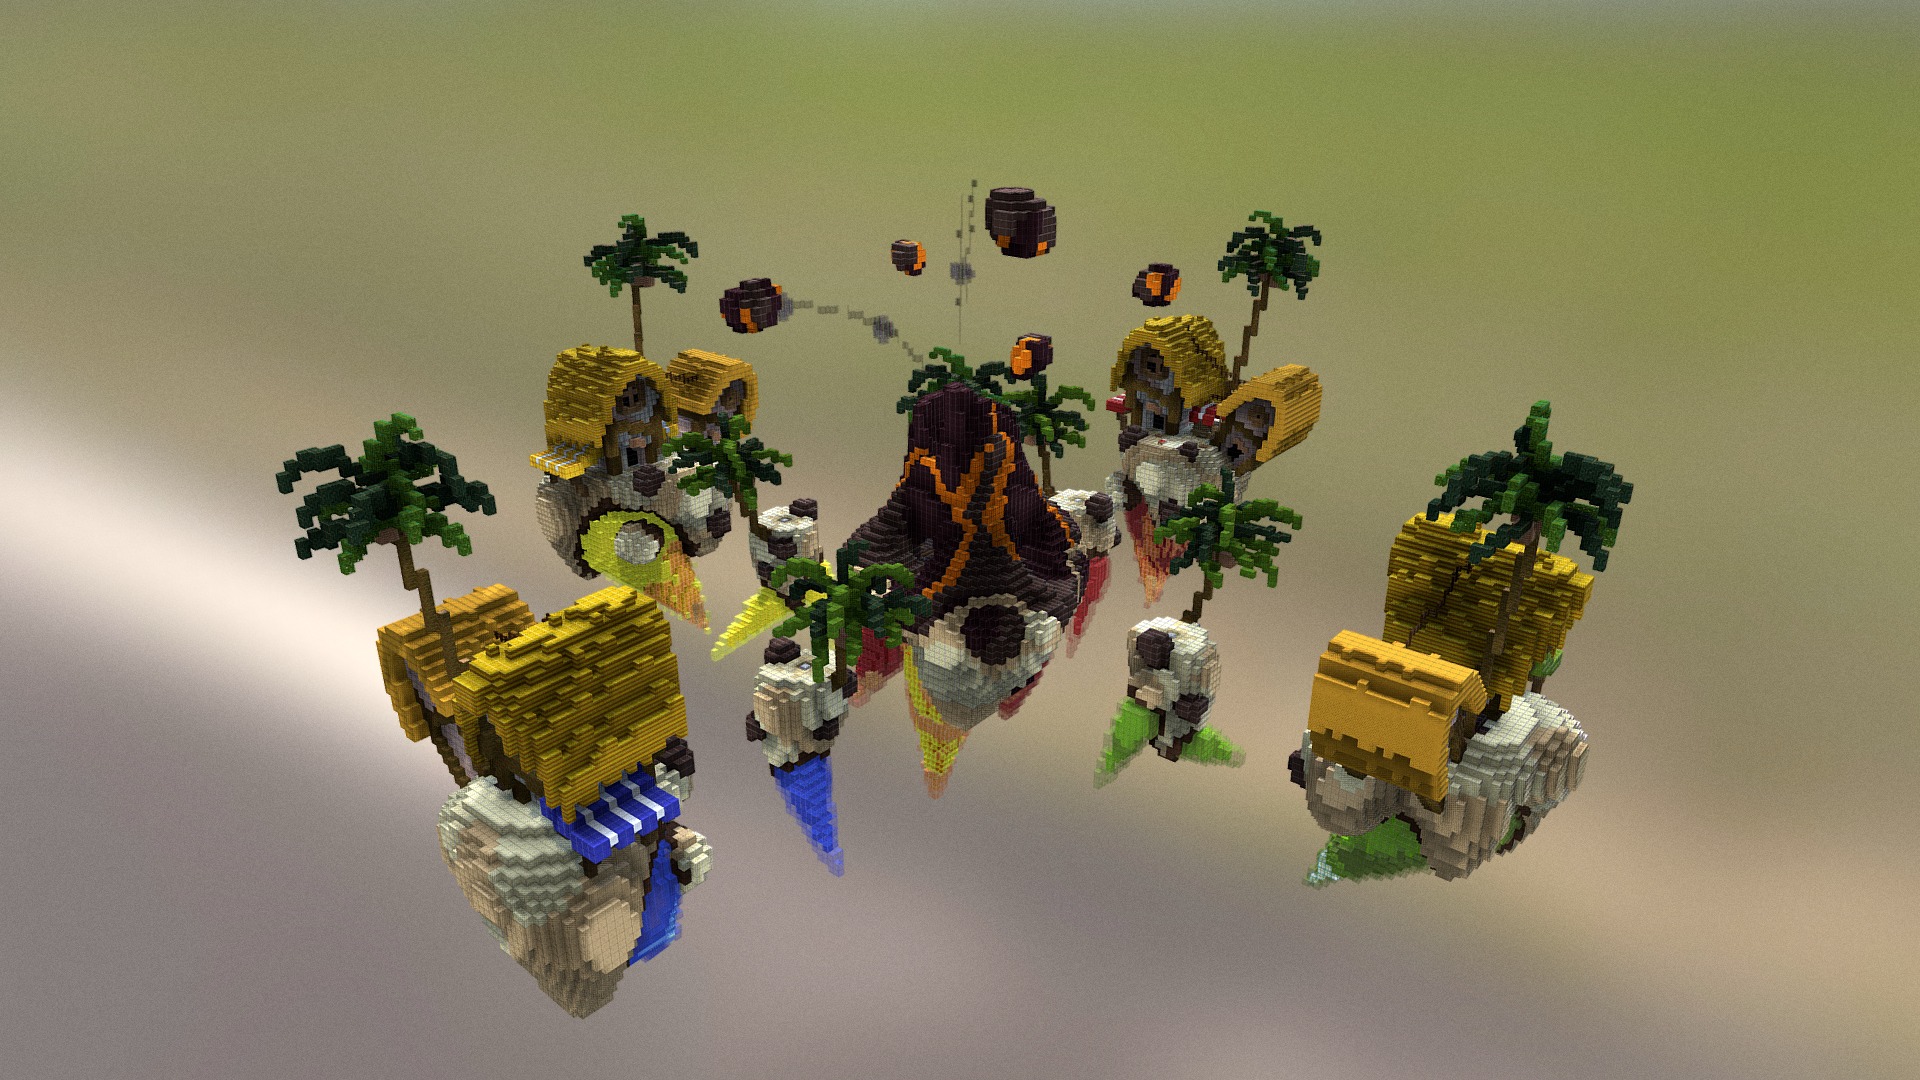 3D model Volcanoooo4x4bedwars - This is a 3D model of the Volcanoooo4x4bedwars. The 3D model is about a group of toy trees.